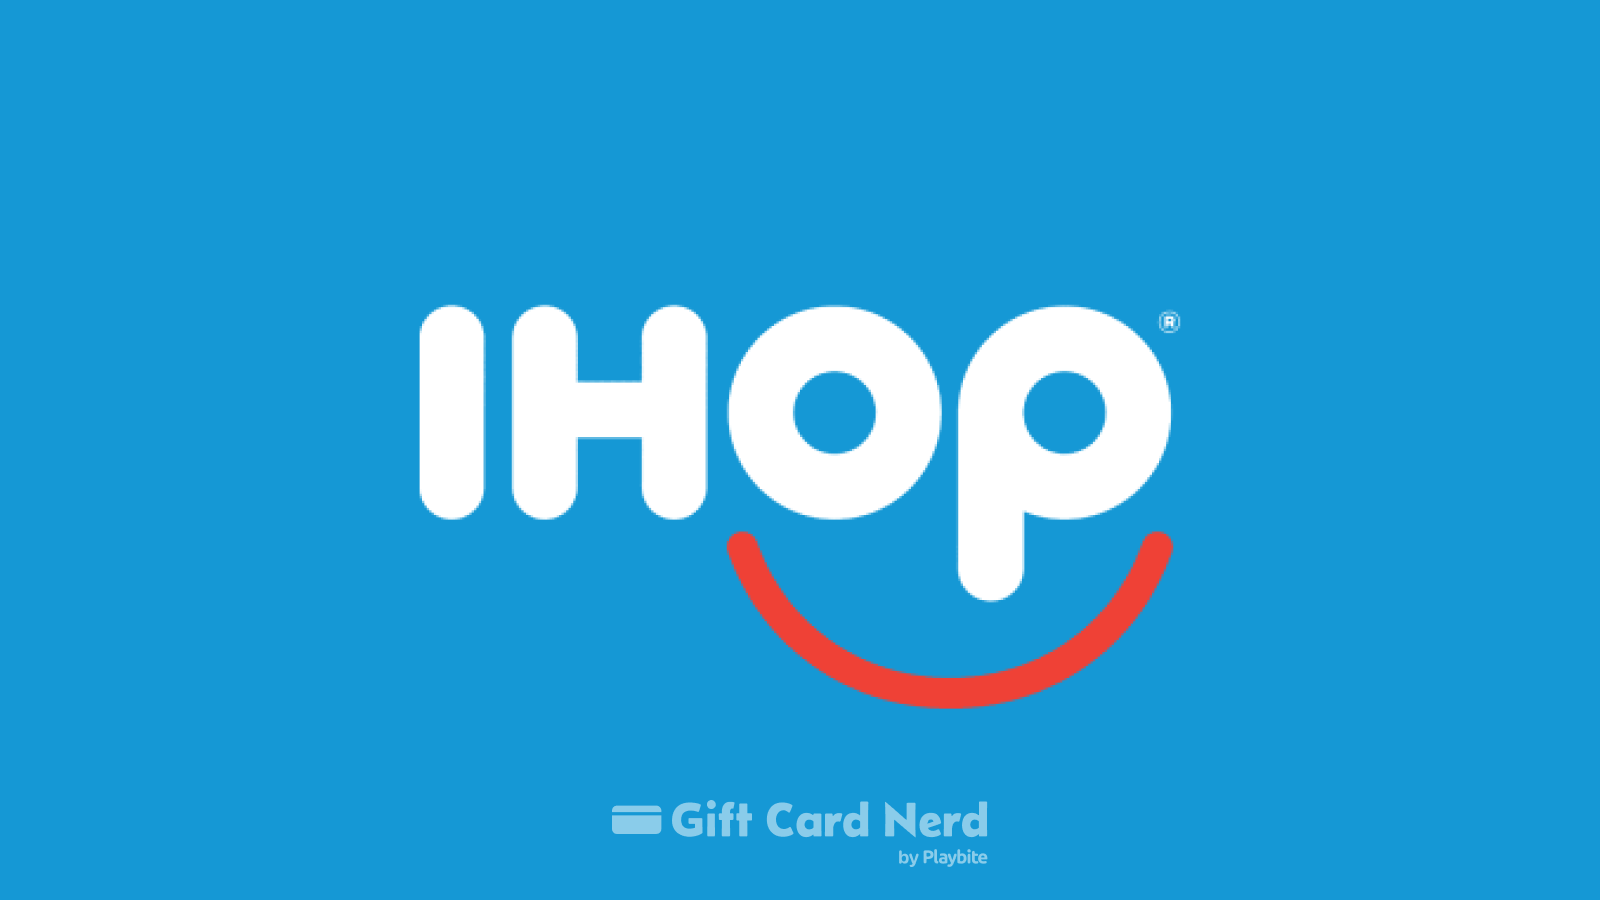 Can I Use an IHOP Gift Card on Roblox?